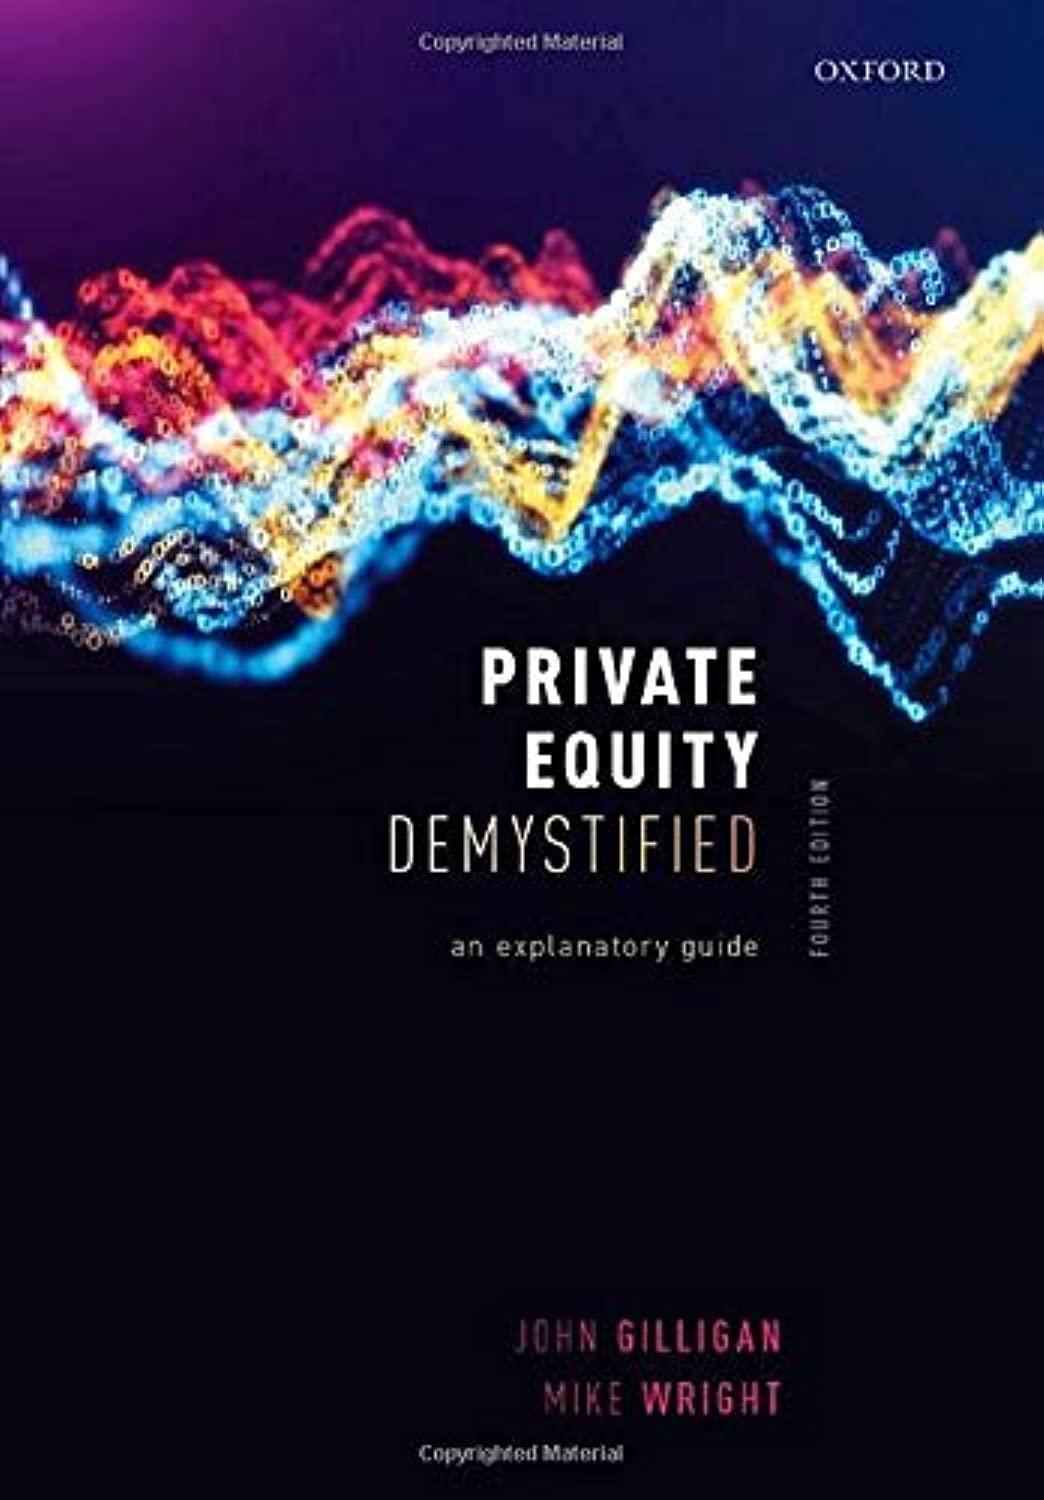 private equity demystified an explanatory guide 4th edition john gilligan, mike wright 0198866992,